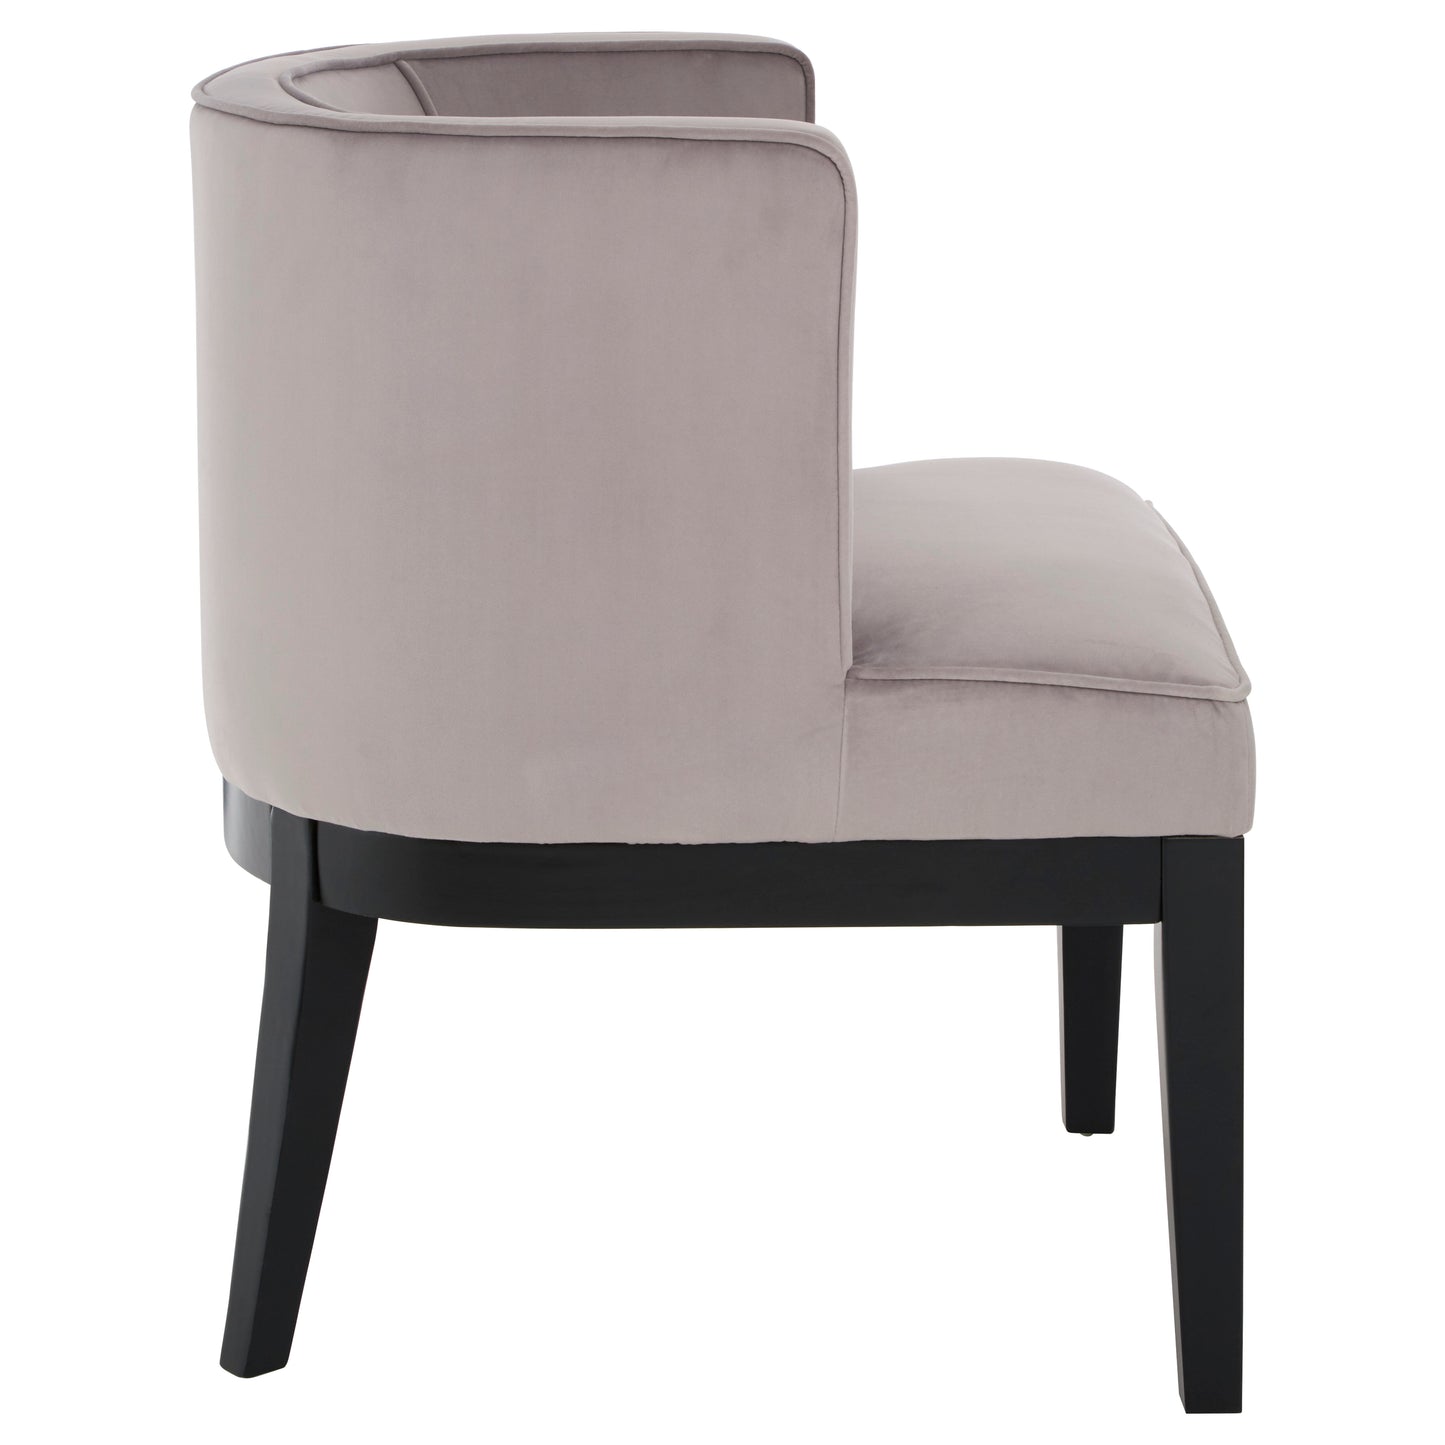 Daxton Velvet Rounded Chair - NIXO Furniture.com